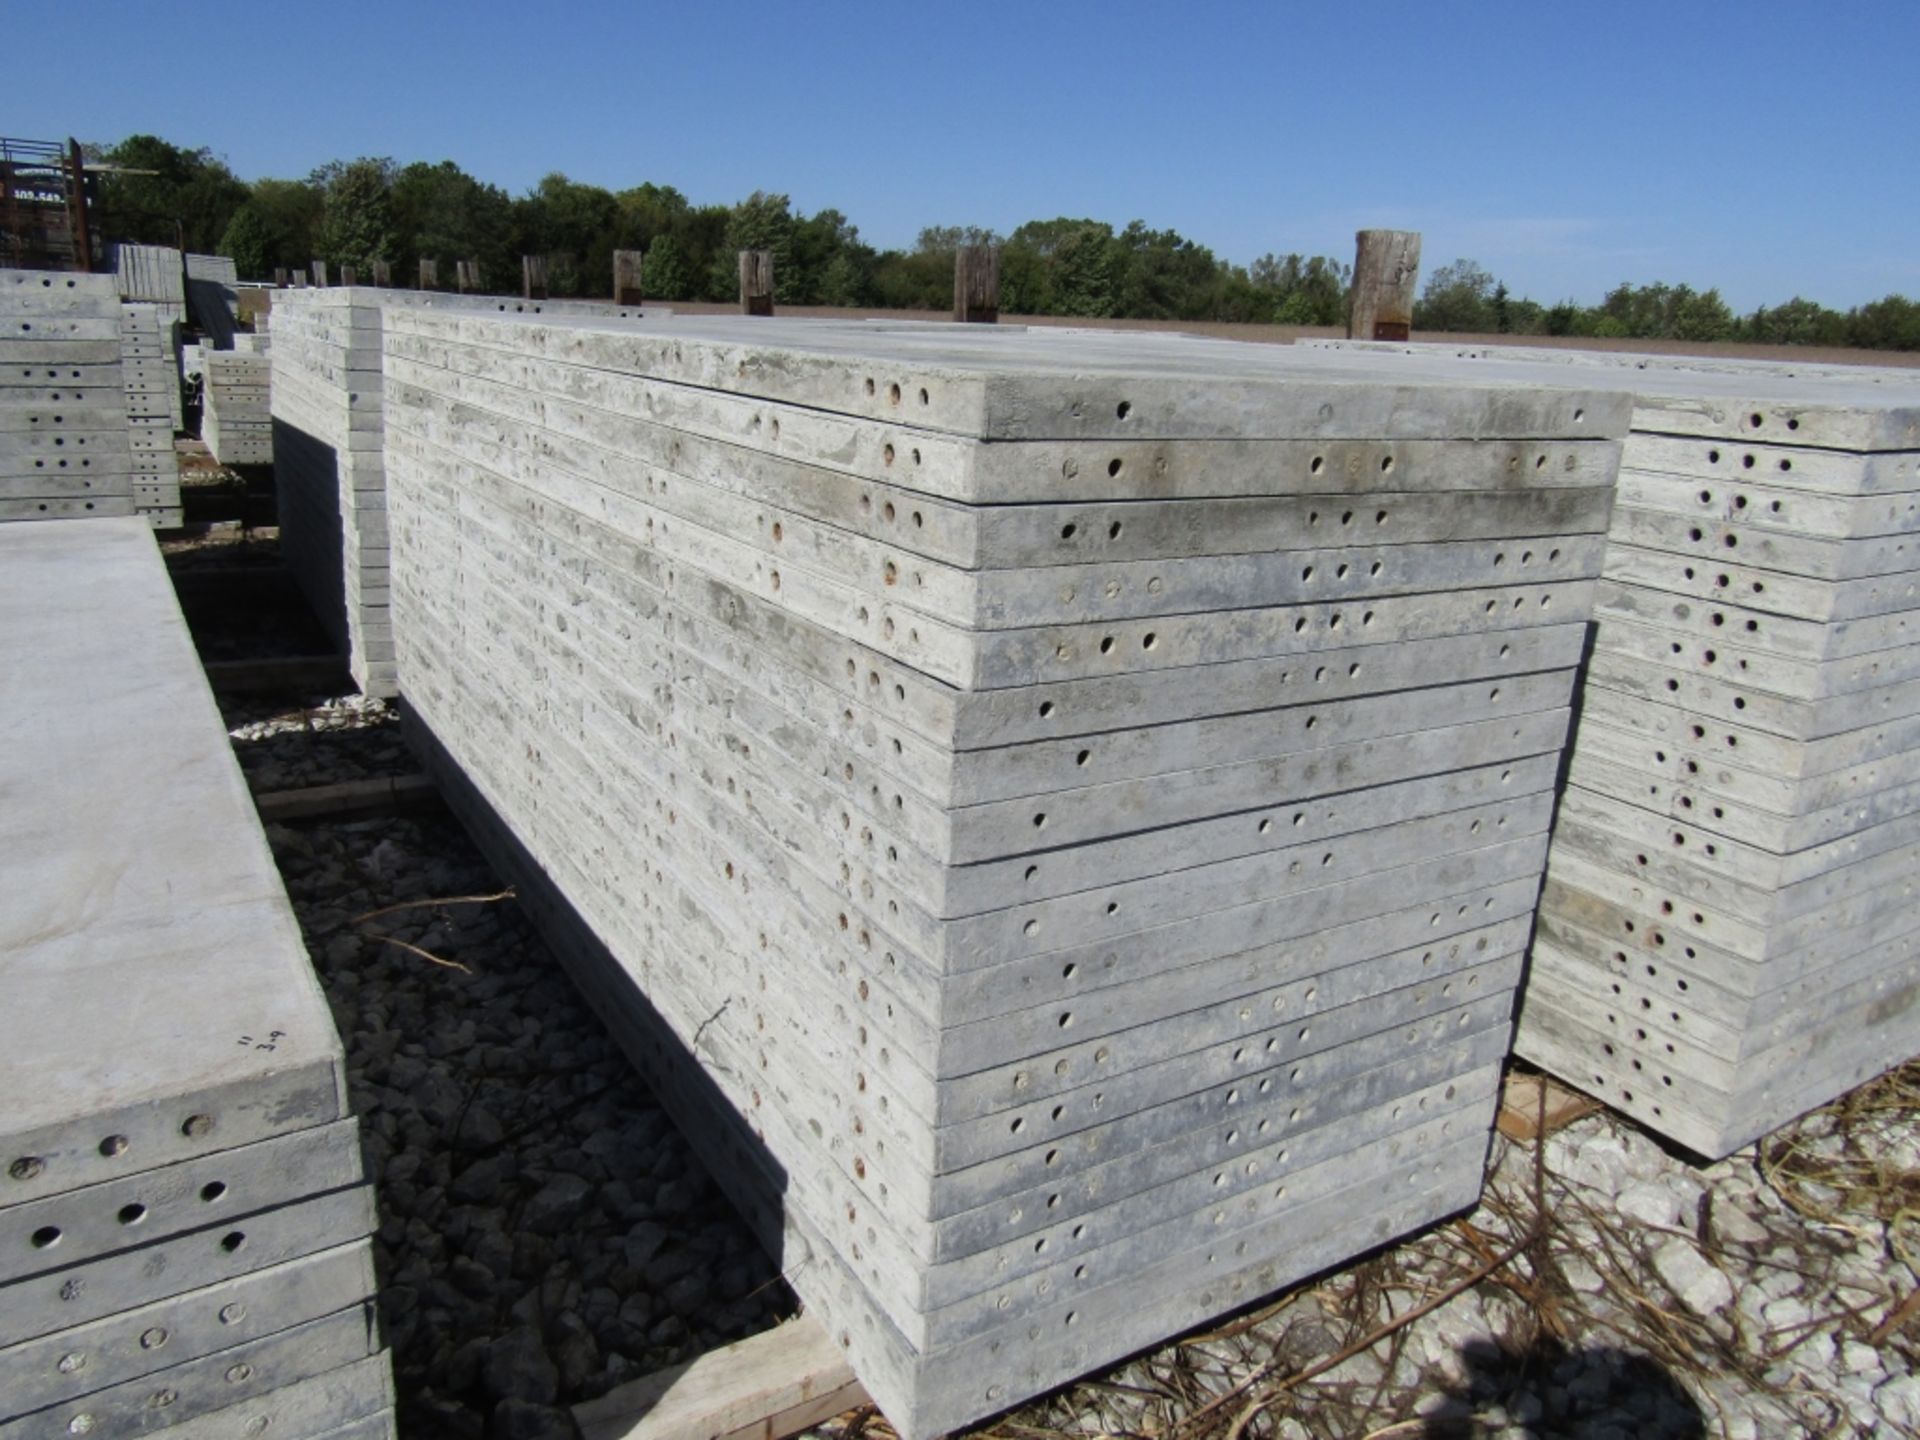 (20) 36" x 9' Wall Ties Concrete Forms, Smooth, 6-12 Hole Pattern, Triple Punch, Located near